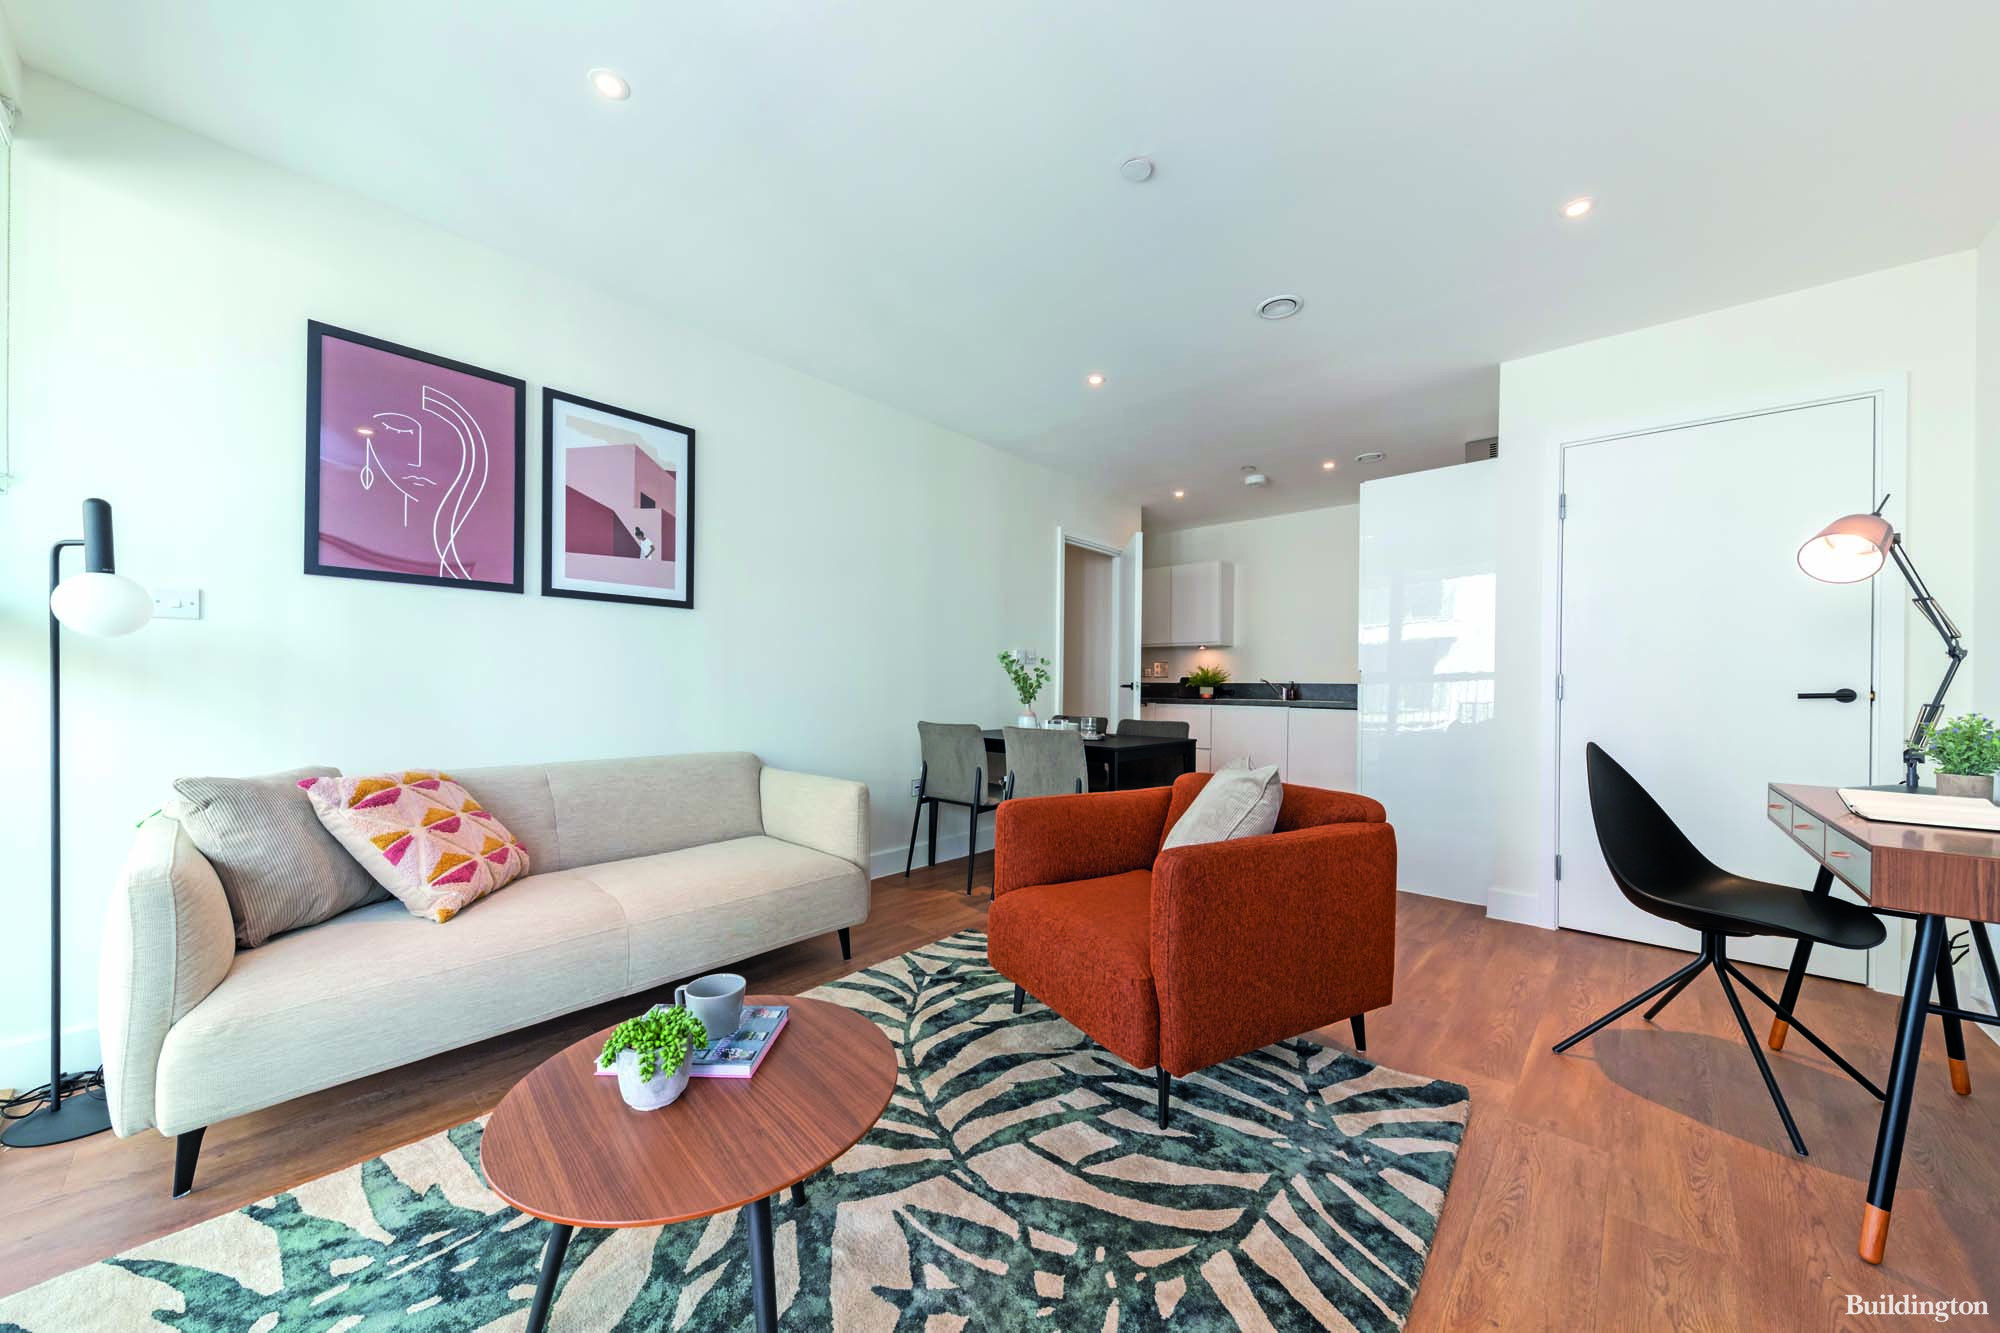 Fully furnished with BoConcept furniture, the brand new 1 and 2-bedroom NWX Residences all have open plan layouts.